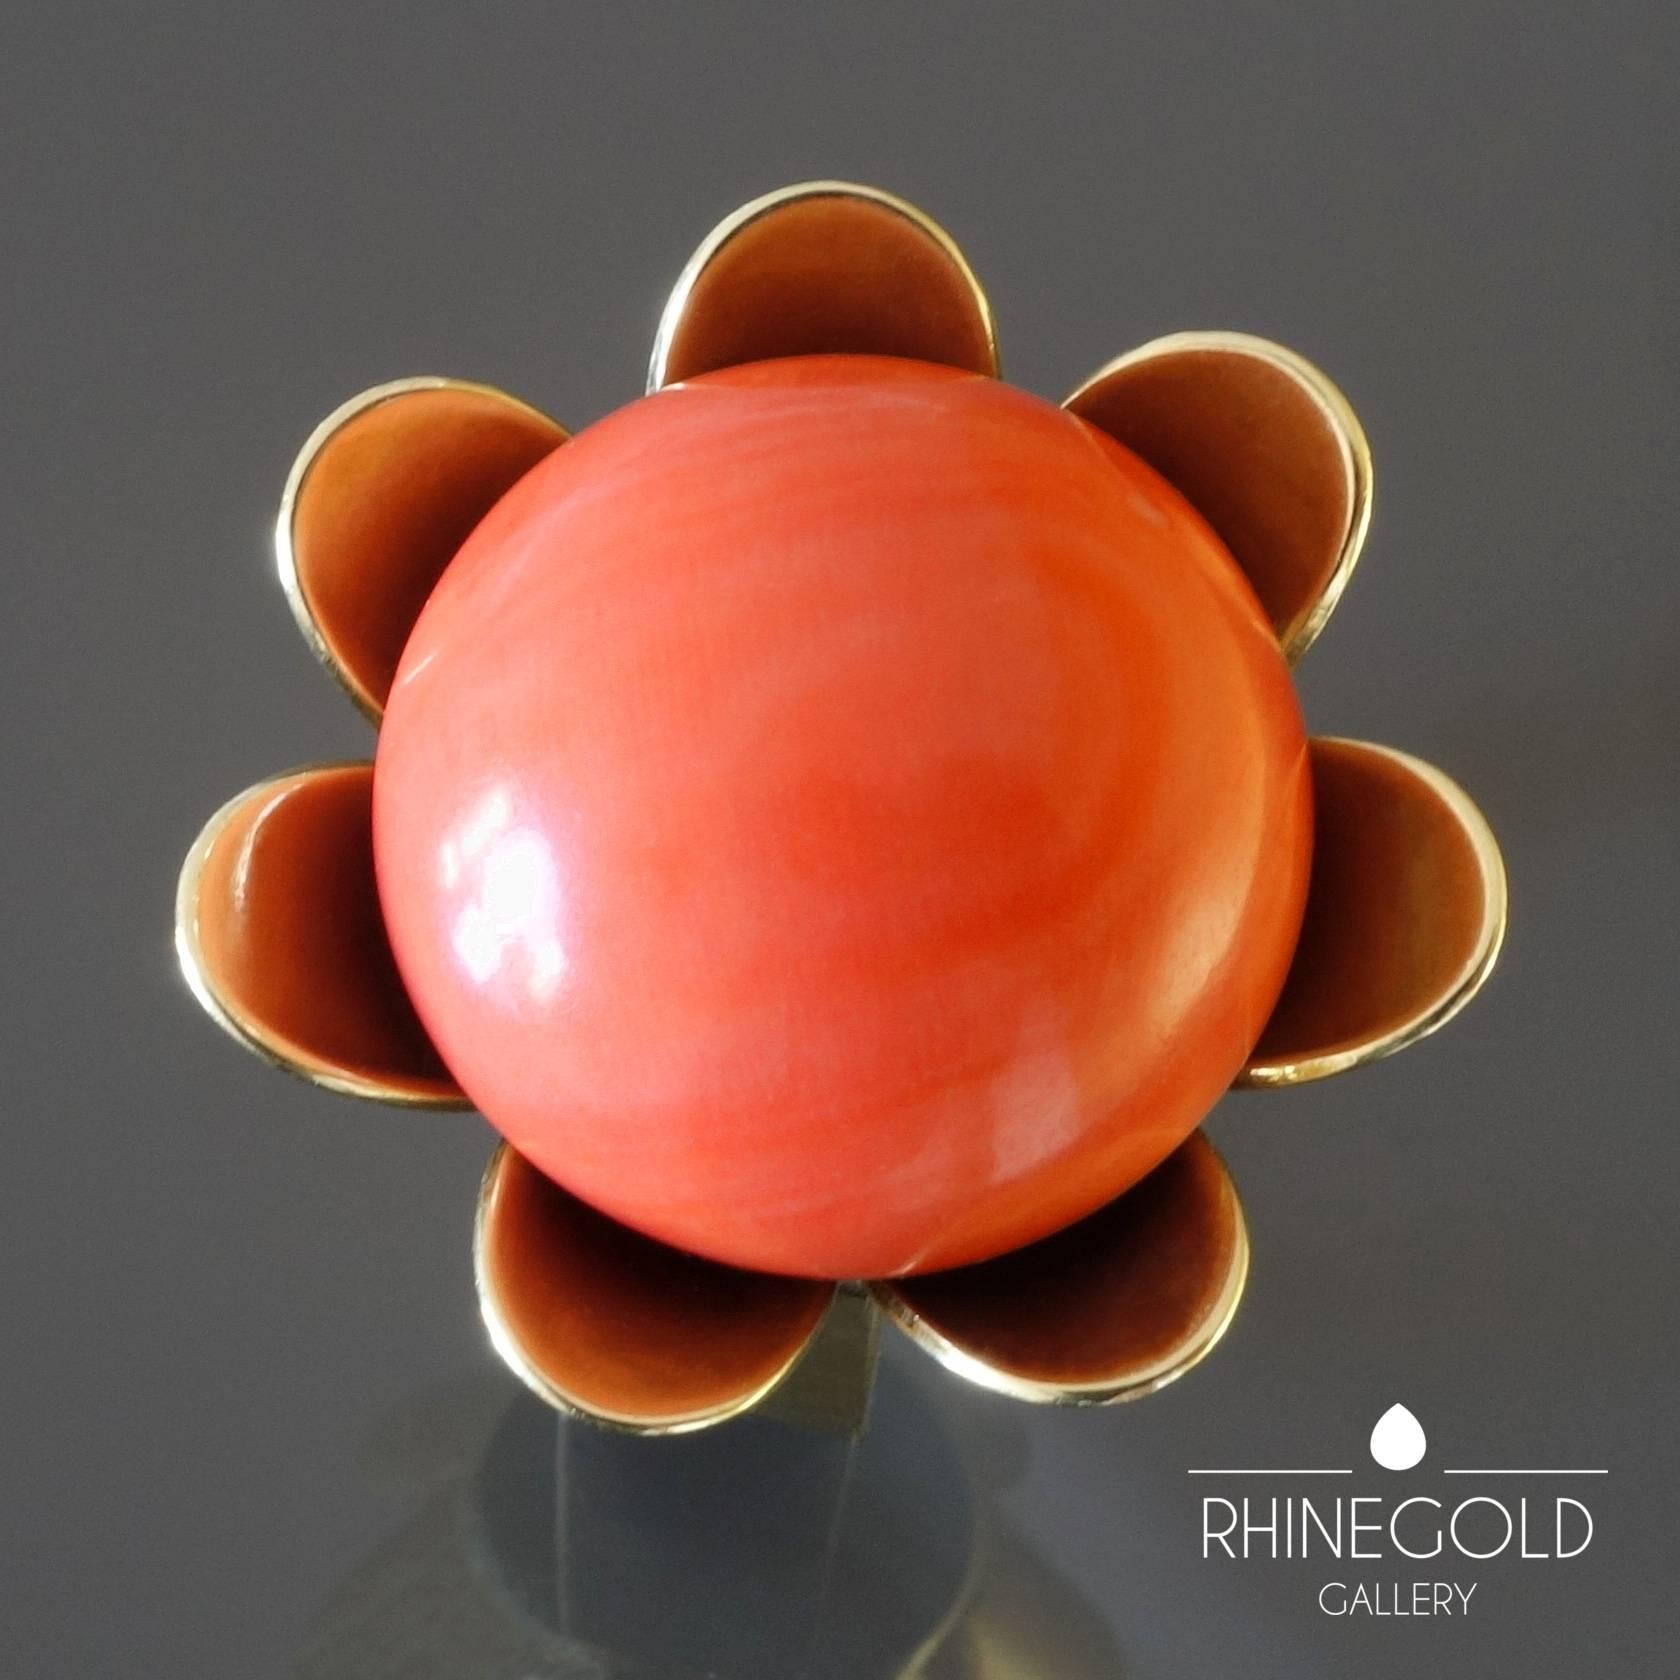 German Modernist Stylized Flower Coral Gold Cocktail Ring
14k yellow gold, natural salmon pink-orange coral
Ring head: Ø 2.5 cm (approx. 1